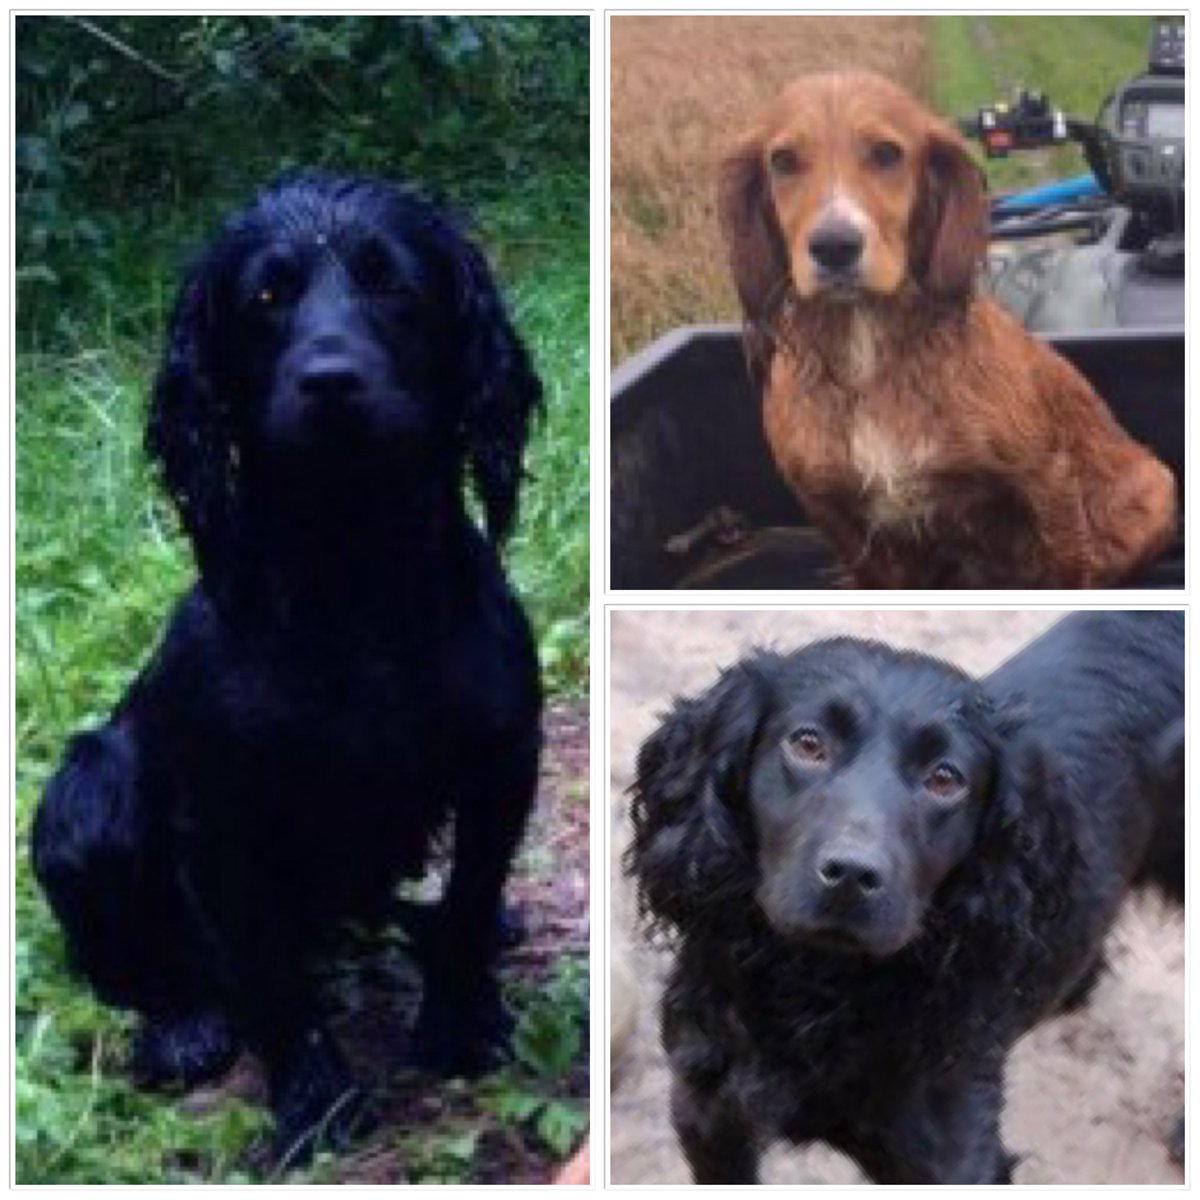 THREE COCKER SPANIELS STOLEN #NorthMolton North #Devon 15.12.17 Another dog was stolen in the same area that night but her body was found the next morning If you have any information CONTACT: 07387077555 or call @DC_Police on 101 doglost.co.uk/dog-blog.php?d…